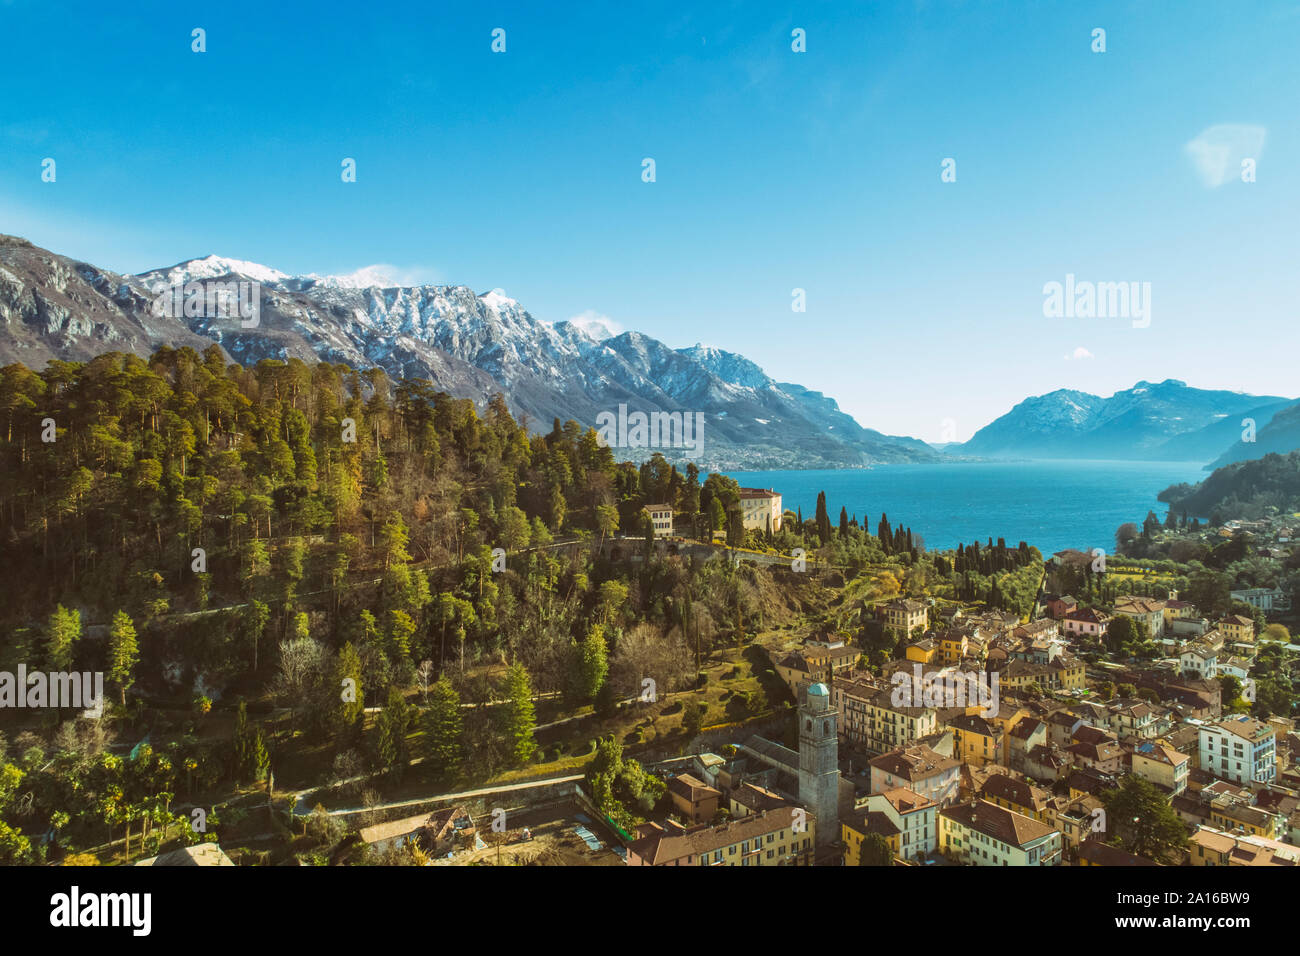 Aerial view of Bellagio on Lake Como with the Alps in the background, Italy Stock Photo